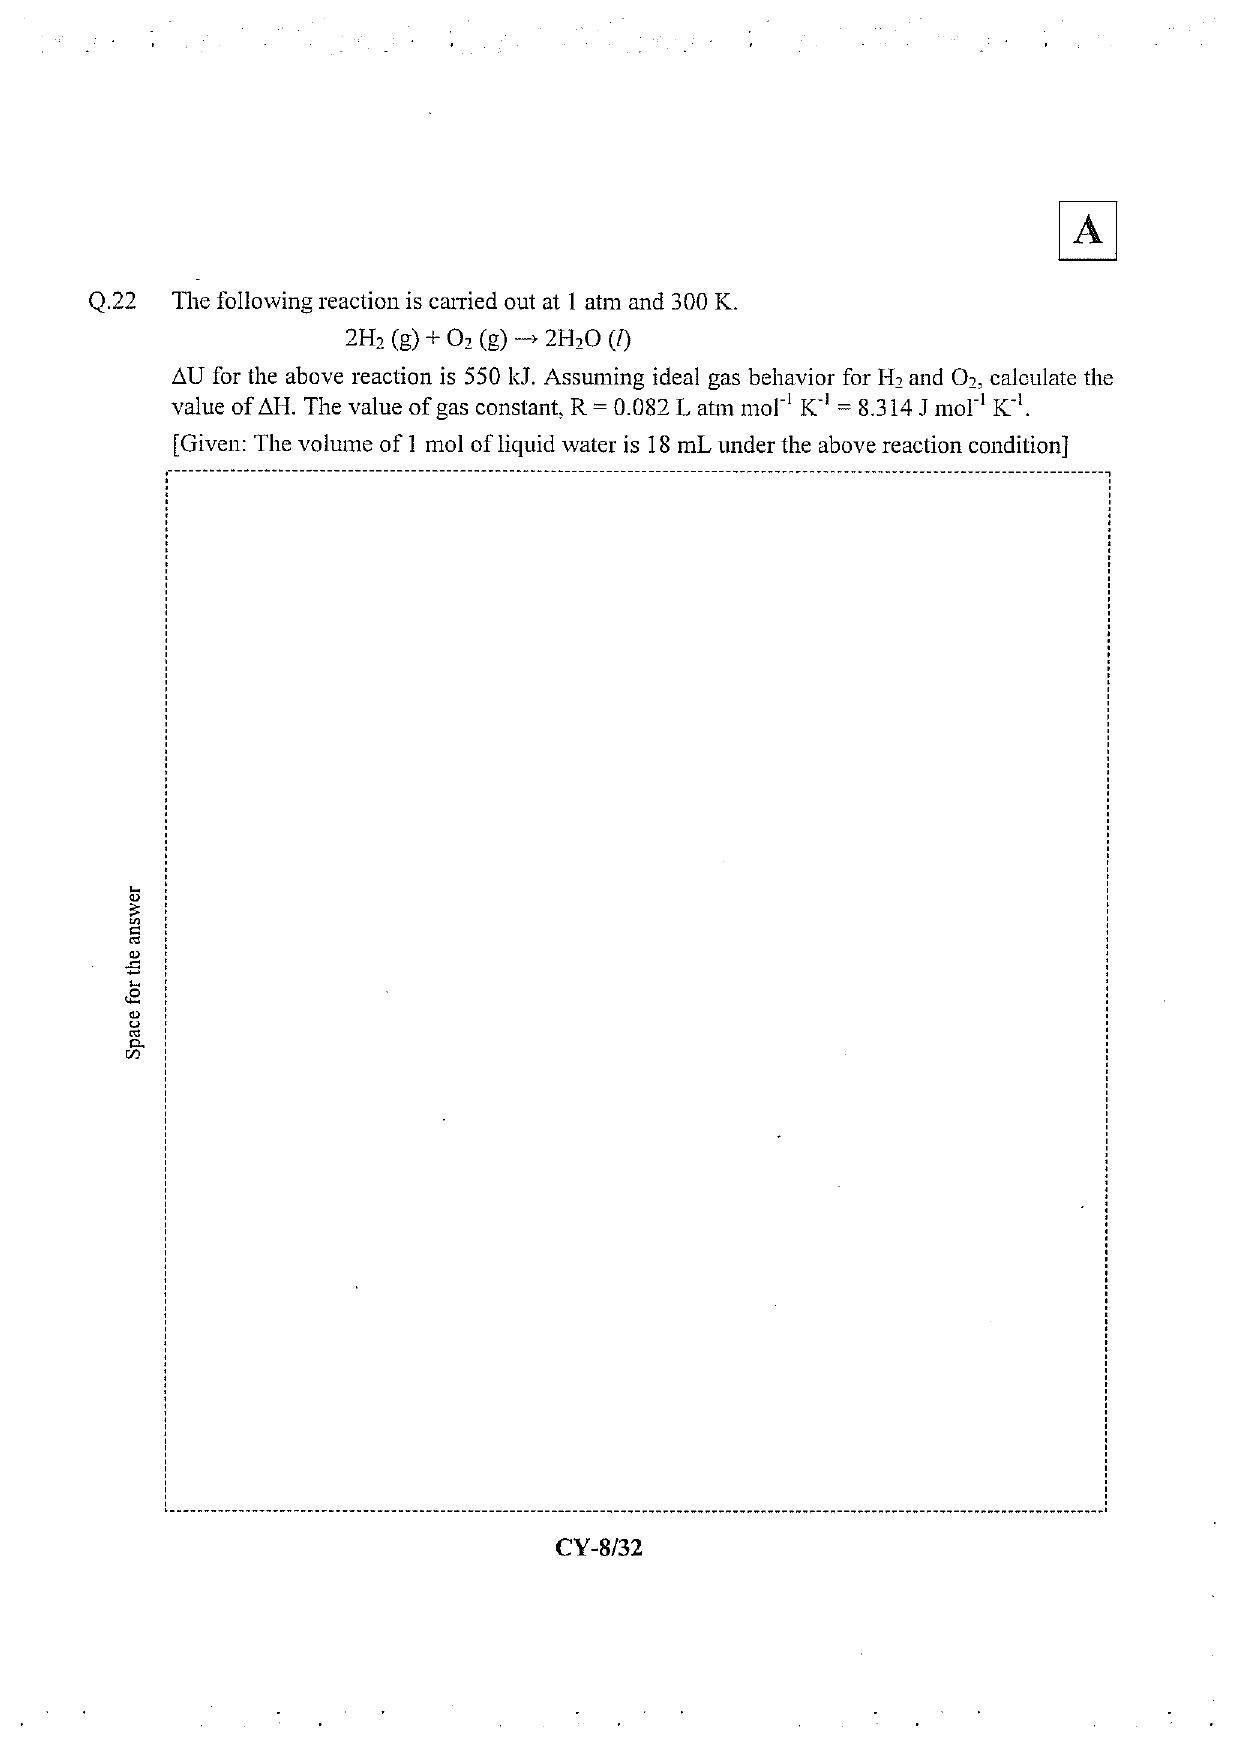 JAM 2013: CY Question Paper - Page 9